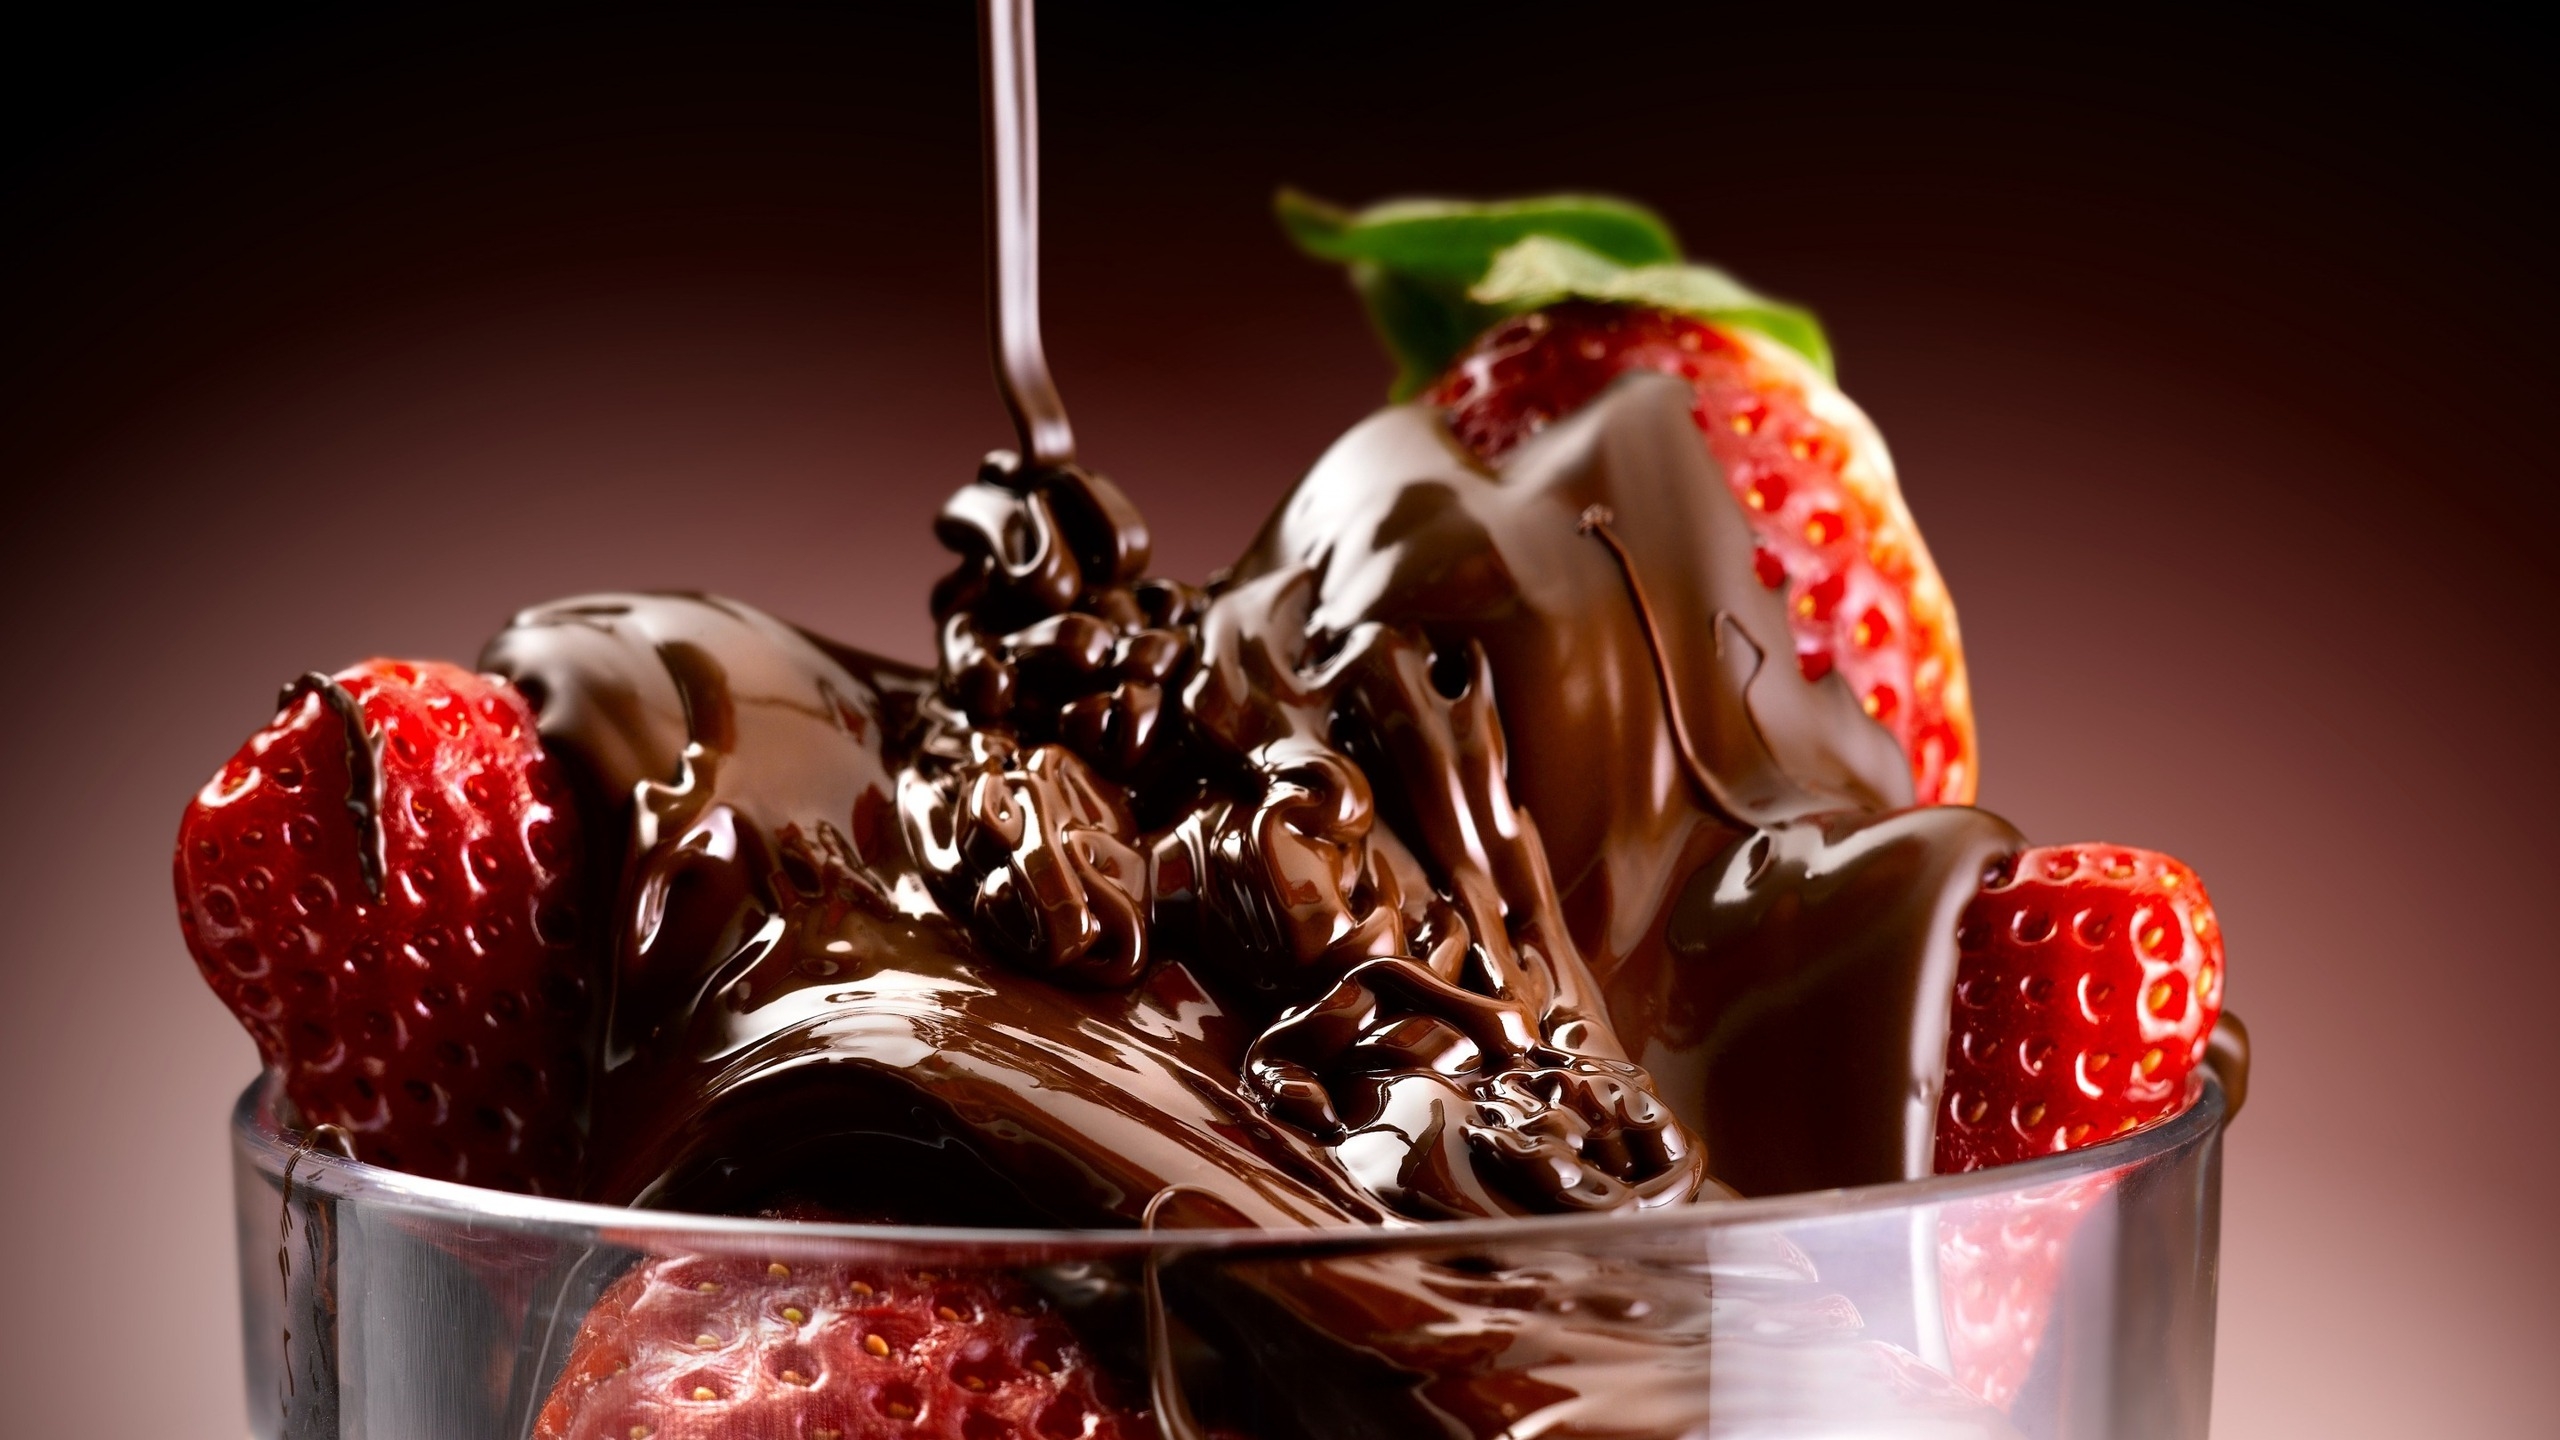 Chocolate and Strawberries for 2560x1440 HDTV resolution